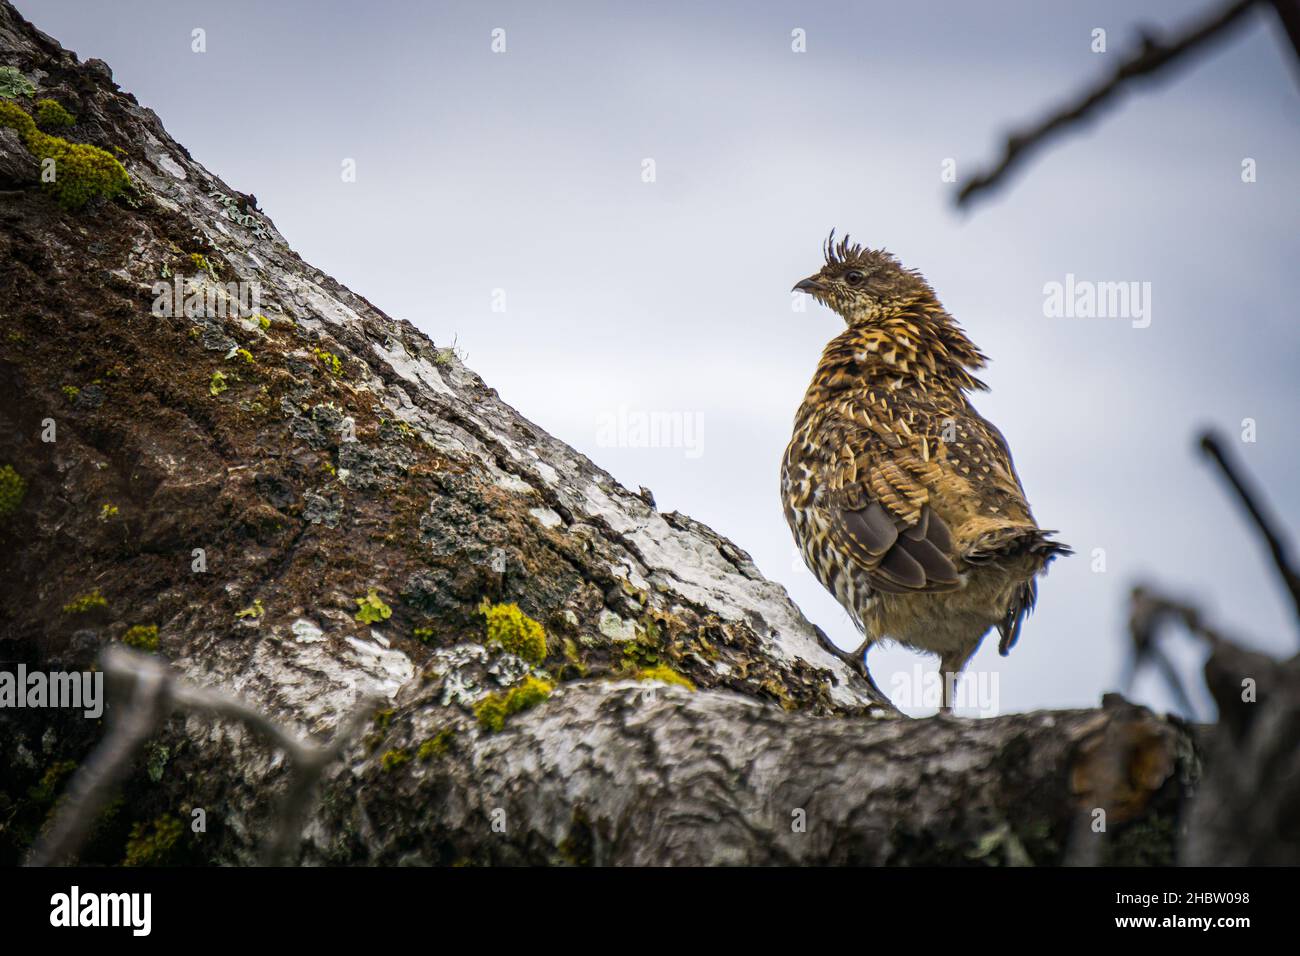 Ruffed grouse in the forest of Anticosti Island, an island located in the St Lawrence estuary in Cote Nord region of Quebec, Canada Stock Photo